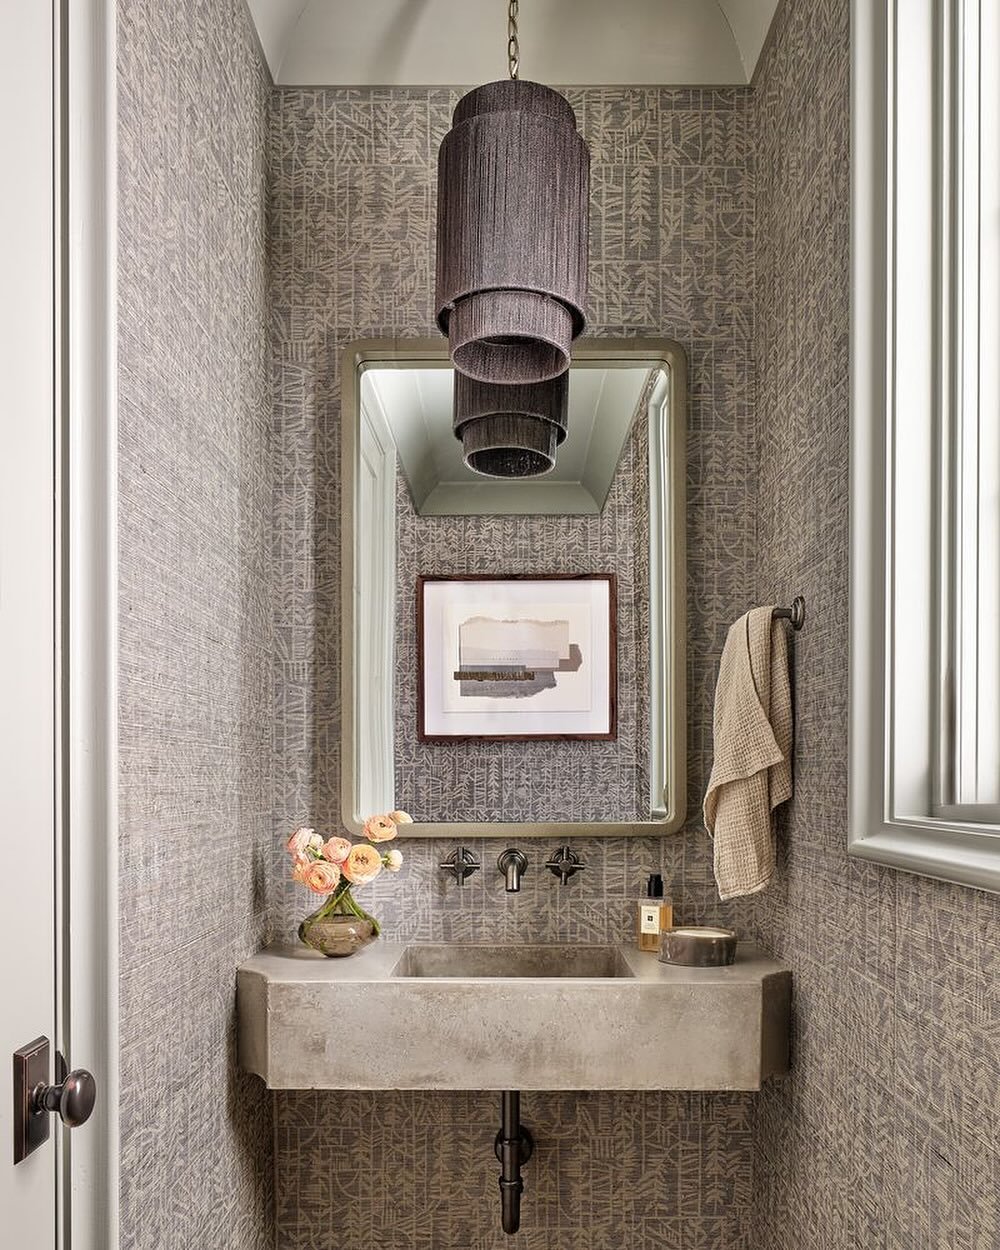 The powder bath: one of my favorite rooms to design